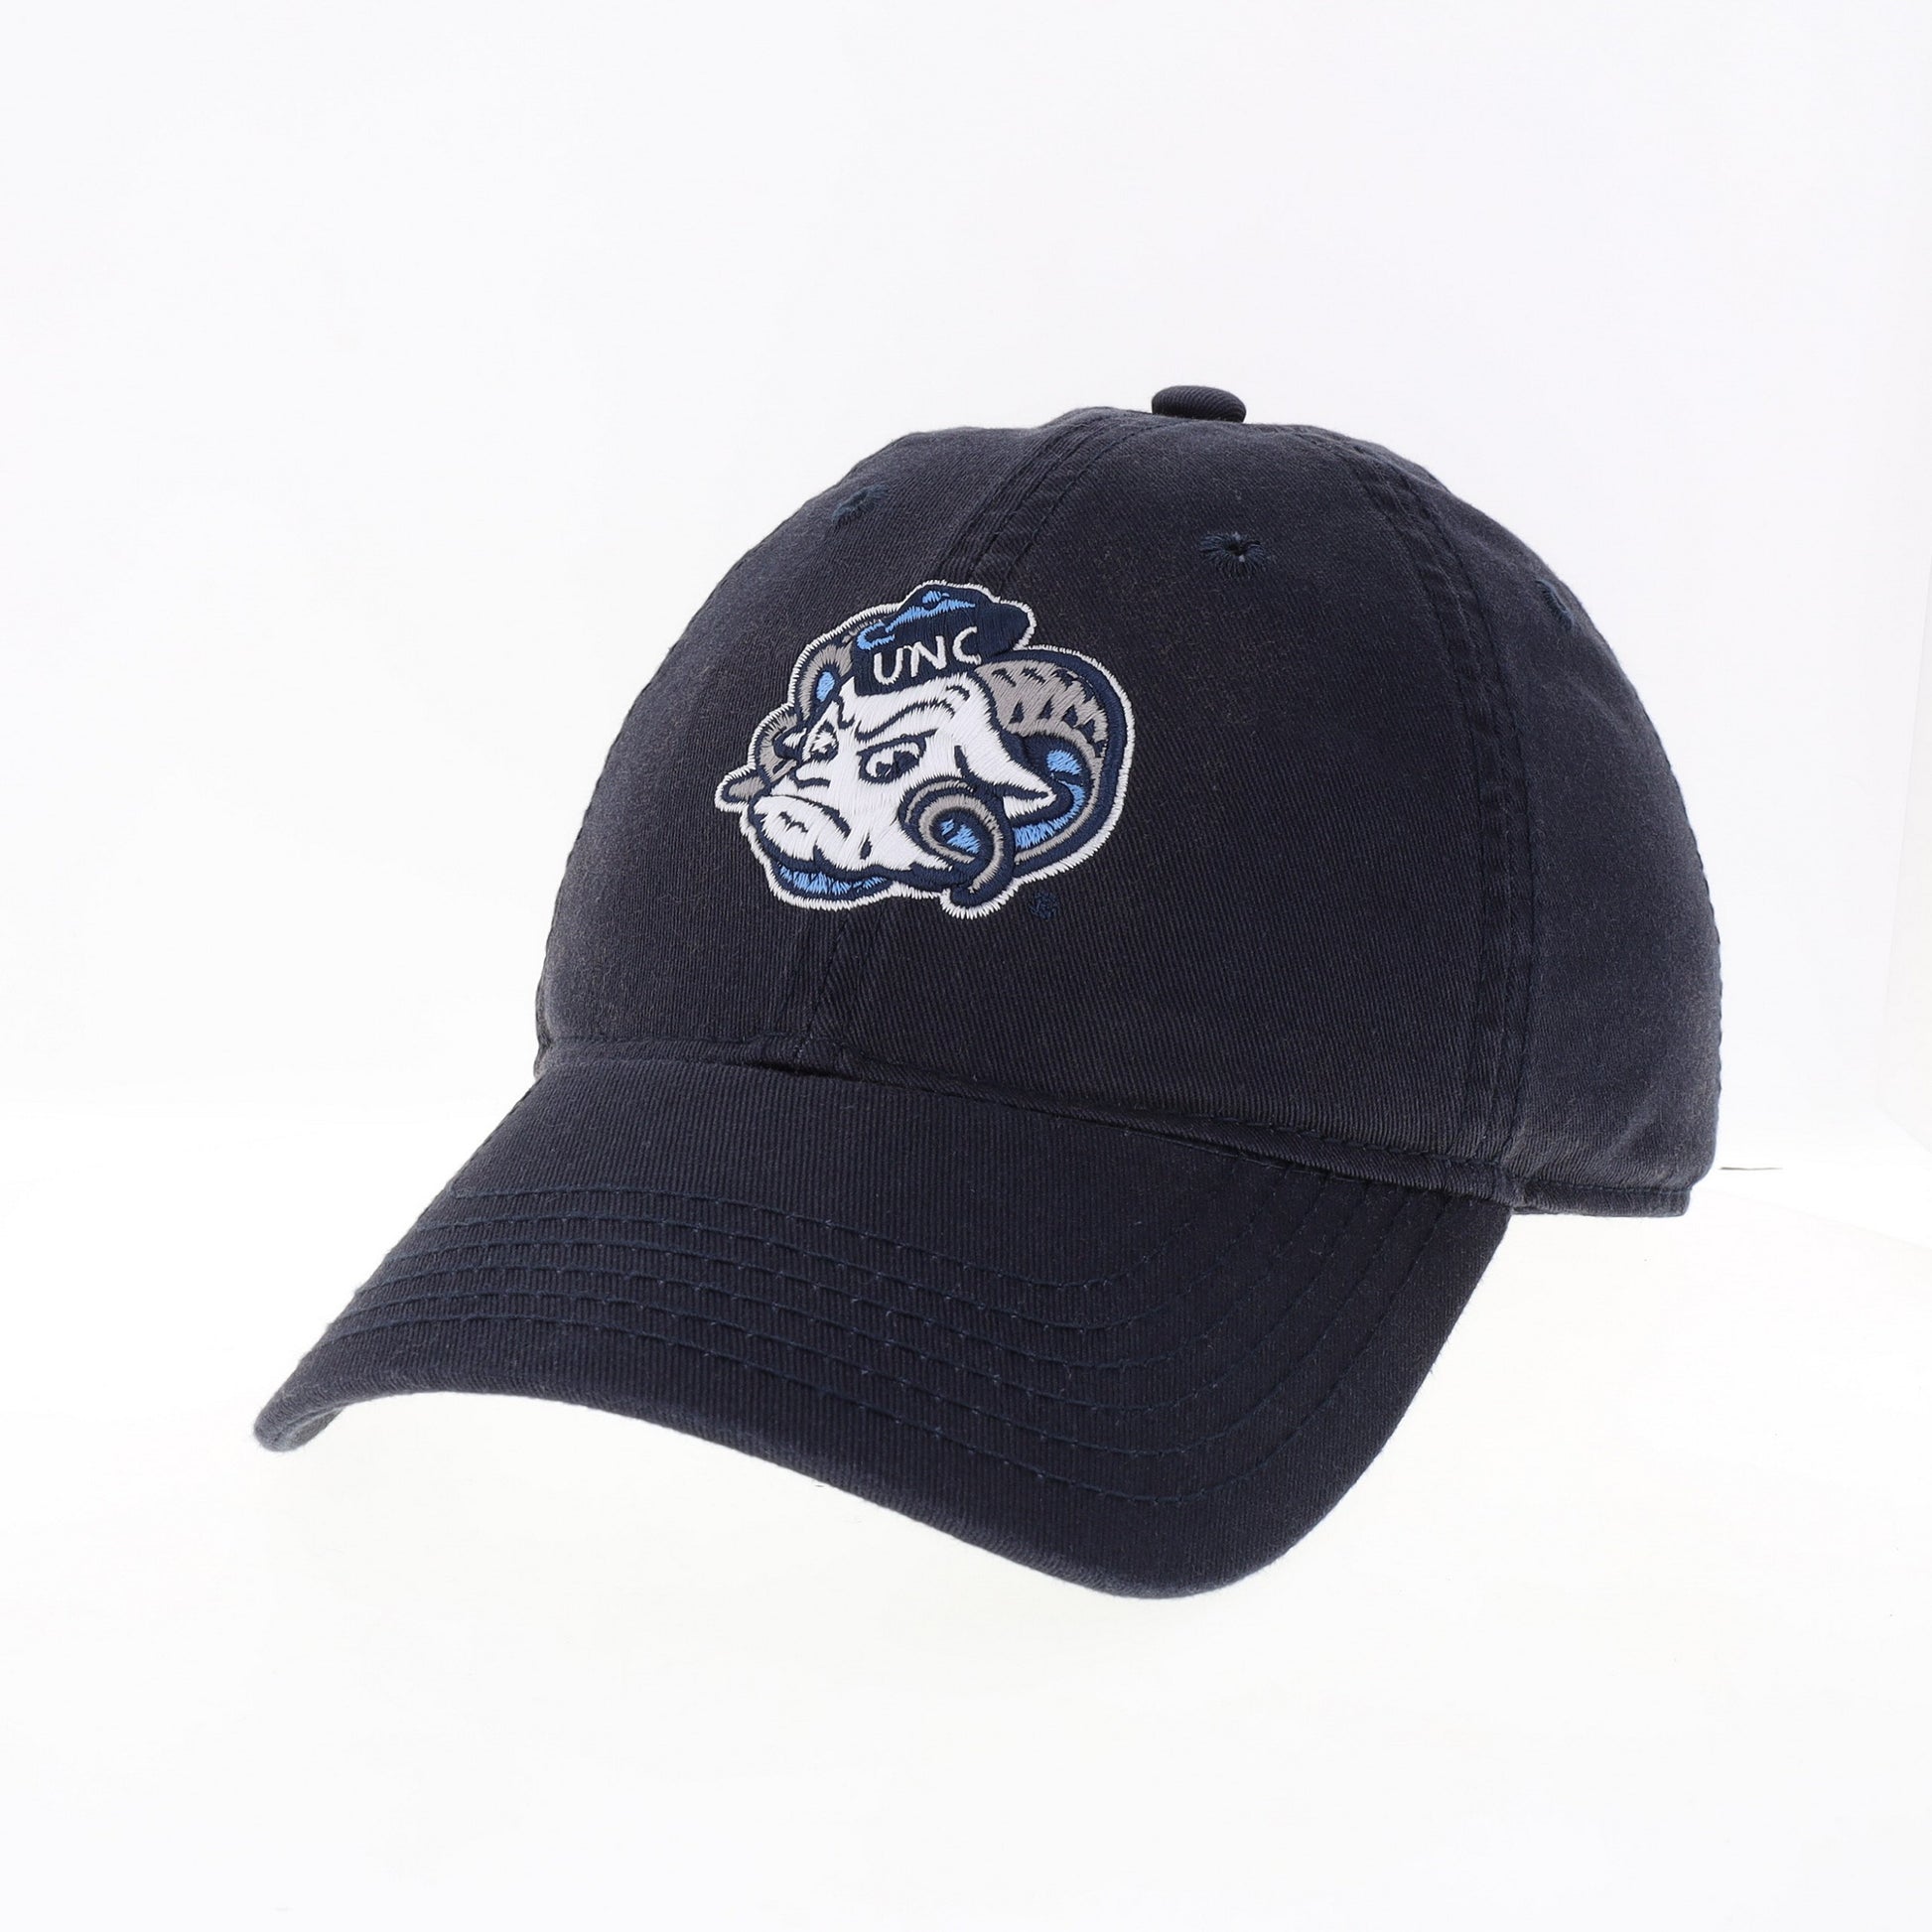 Navy Blue Adjustable Adult Hat with UNC Mascot Ram Face Embroidered on the Front 